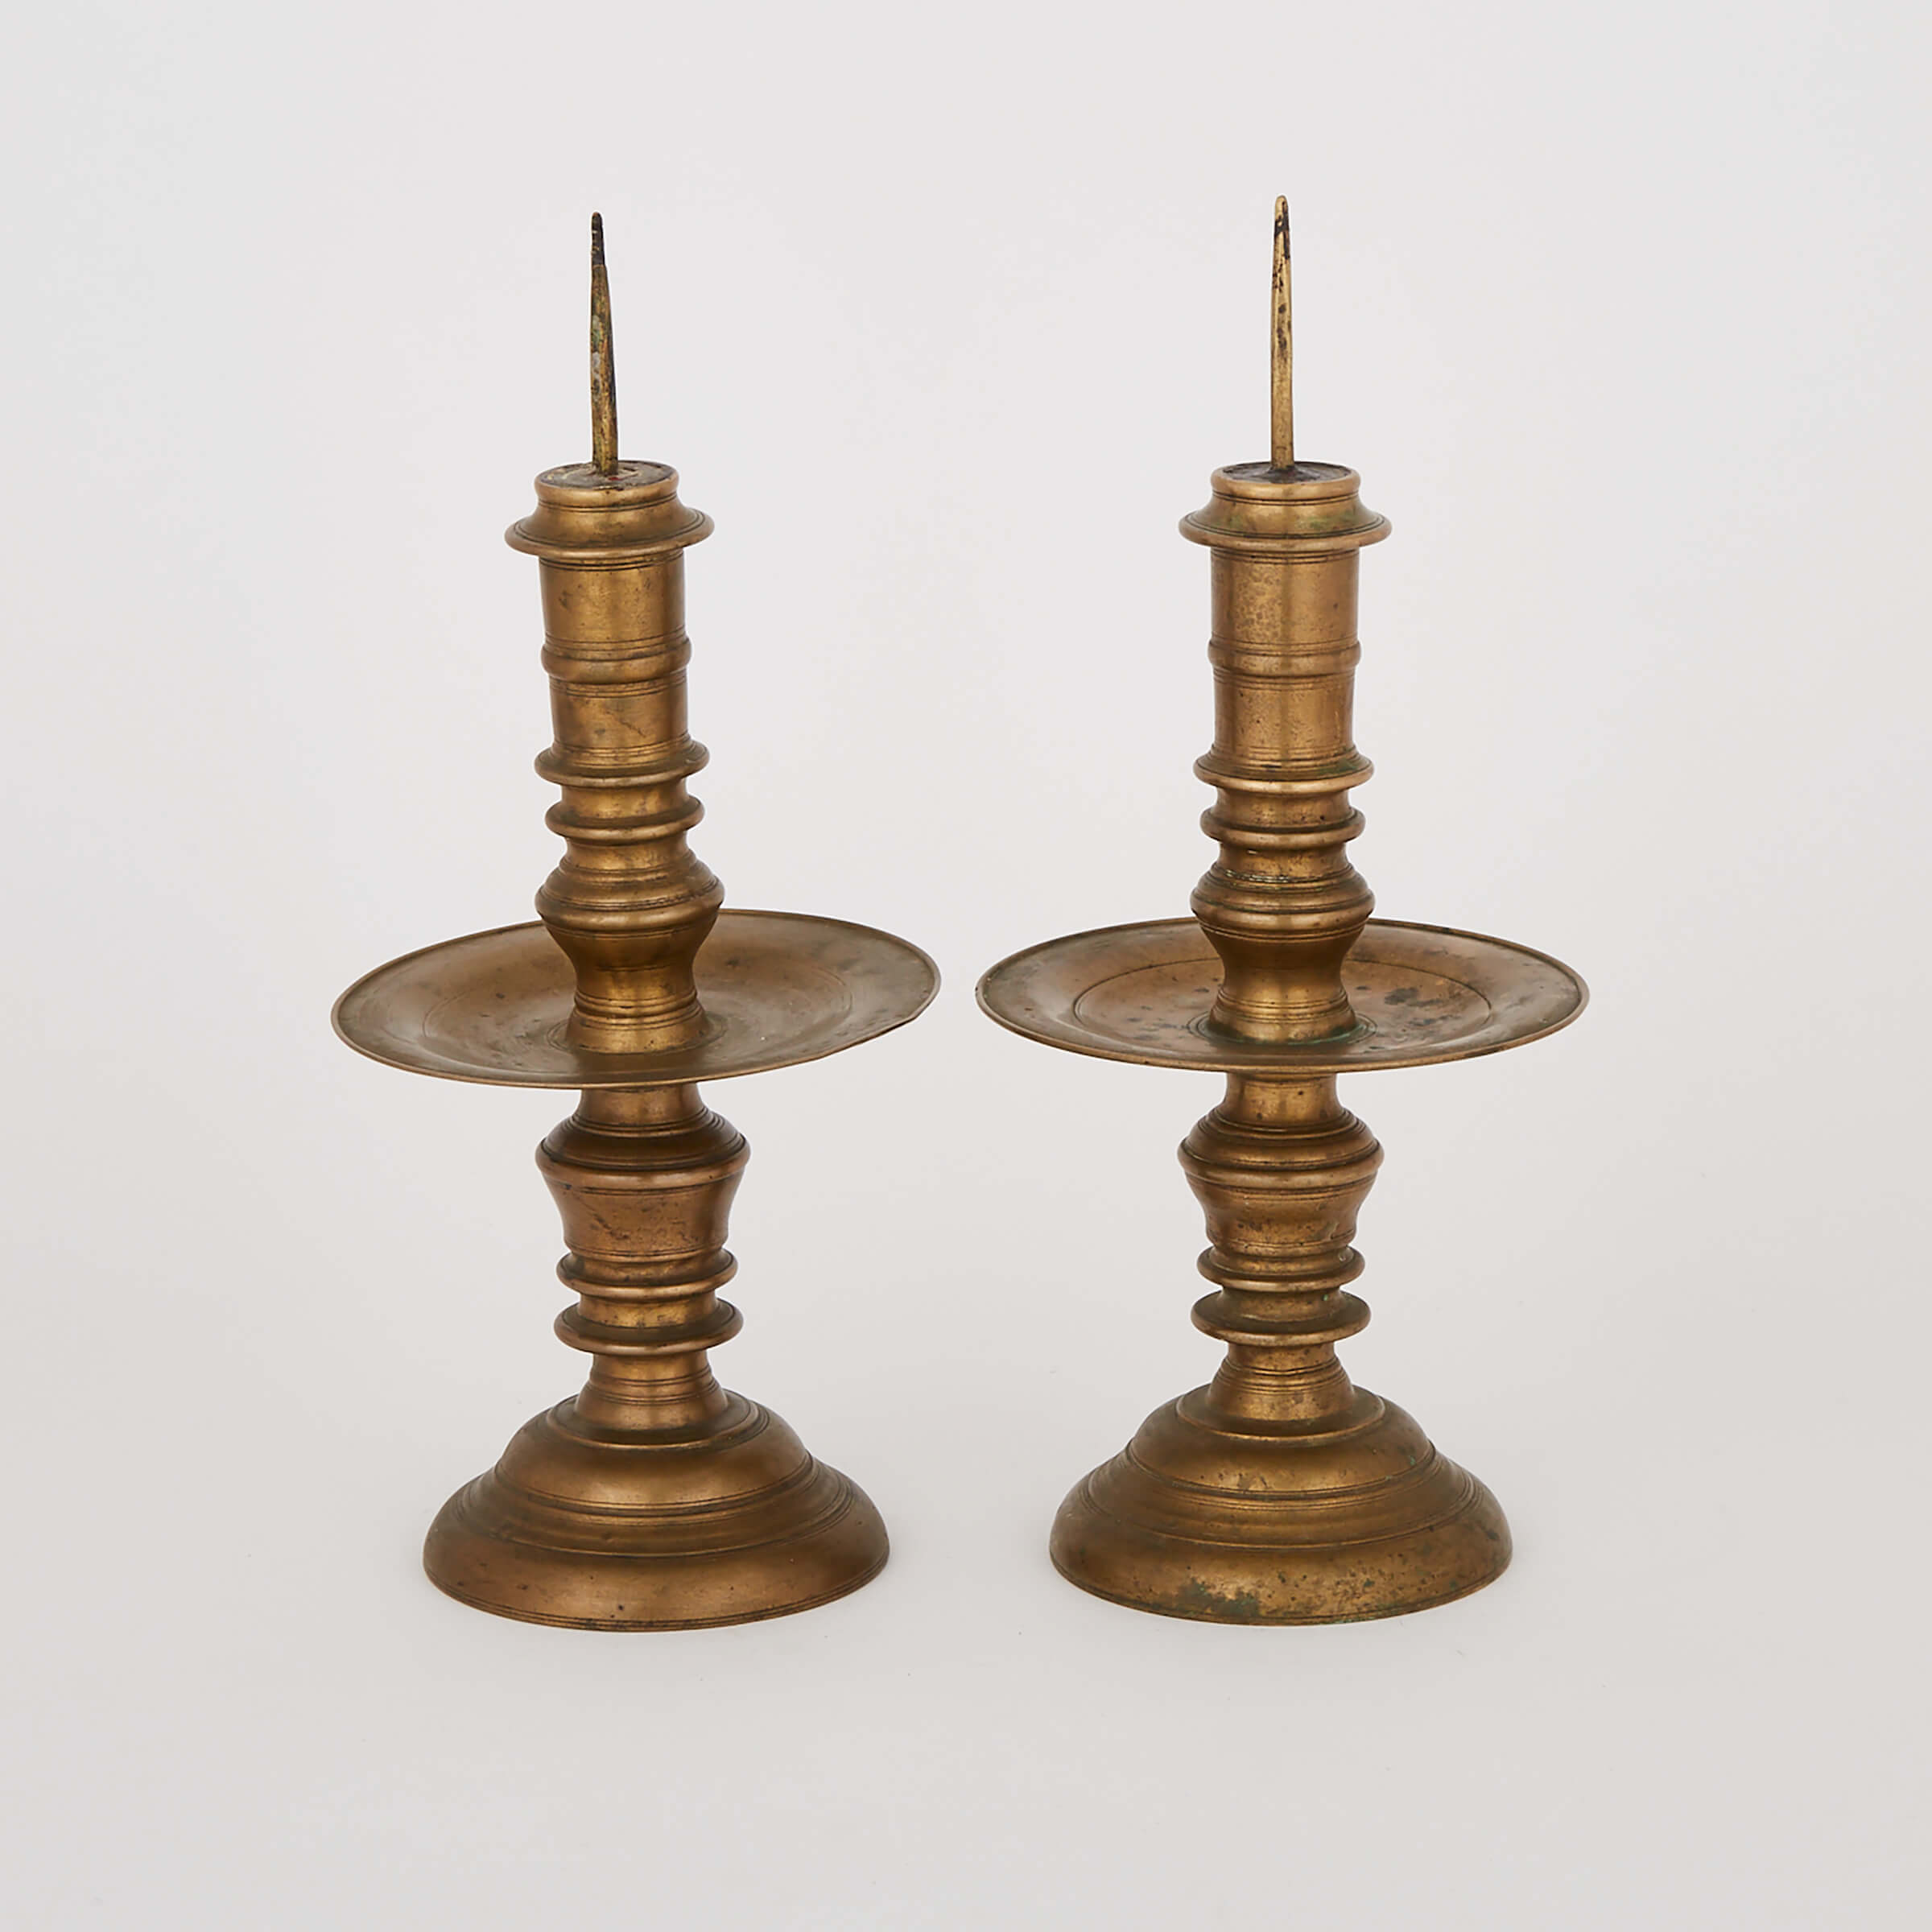 Pair of Southeast Asian Brass Altar Pricket Candlesticks, 19th century or earlier